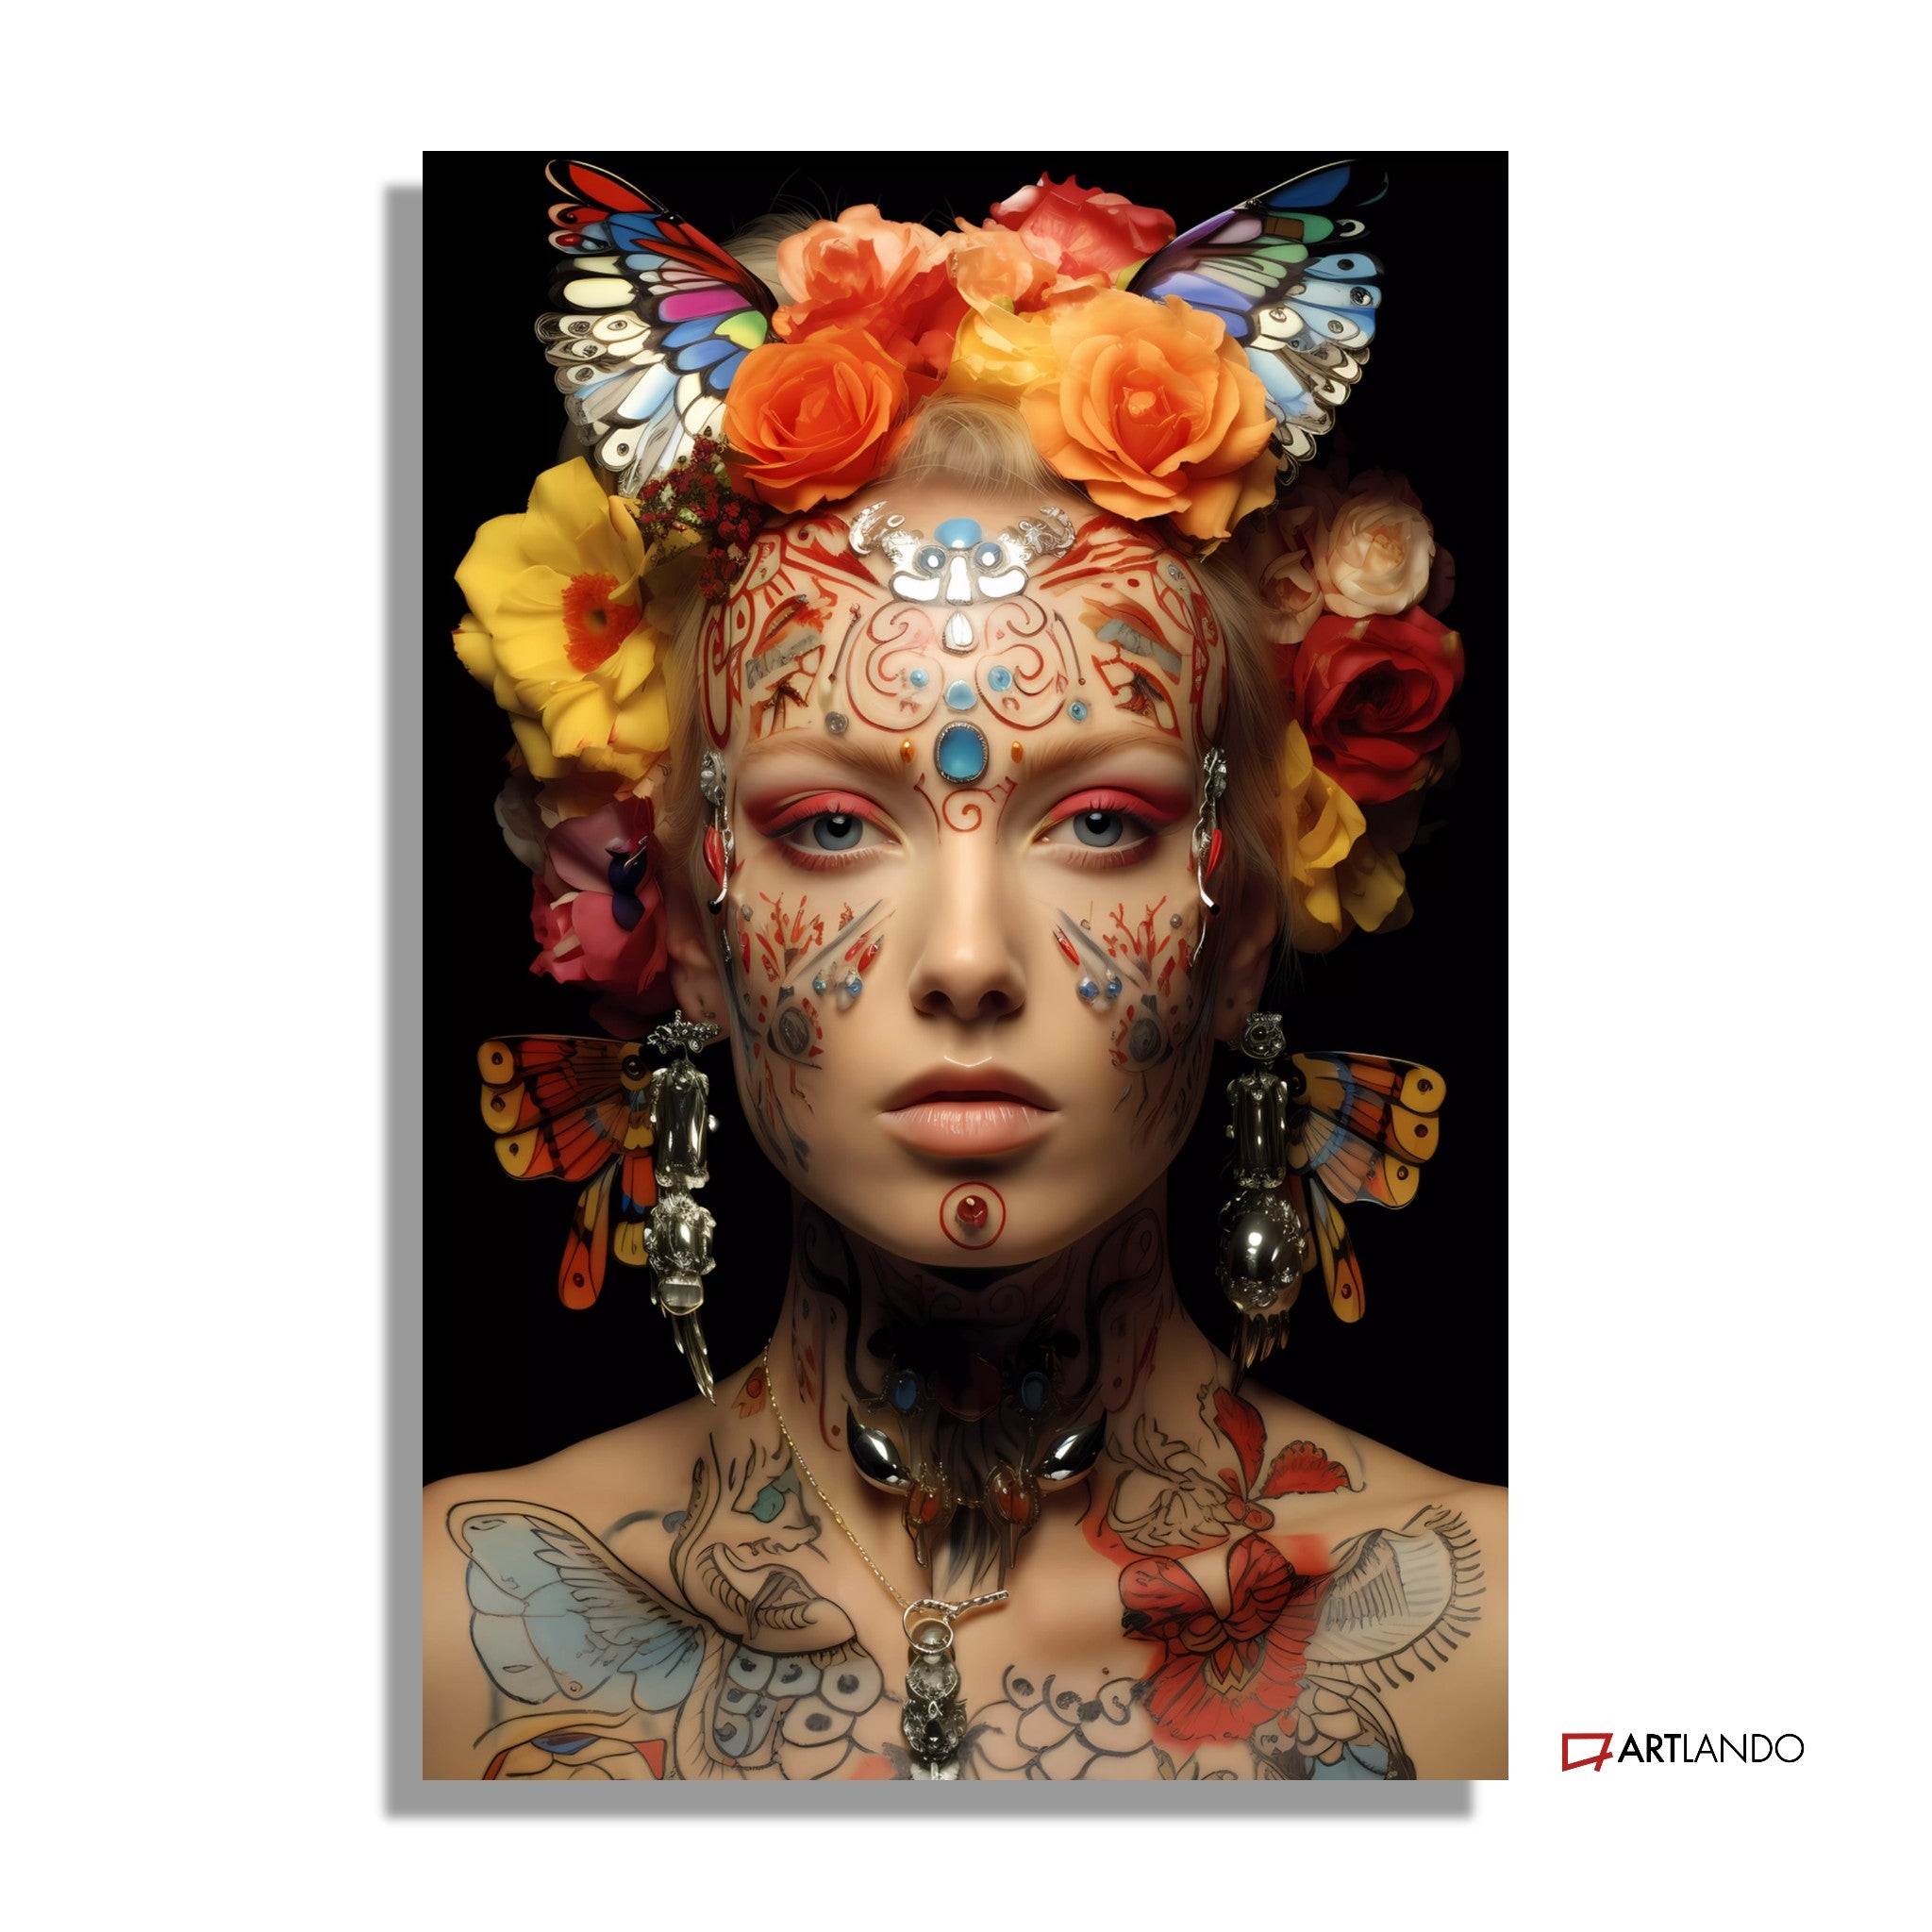 TATTOO GIRL INSPIRED BY DAVID LACHAPELLE